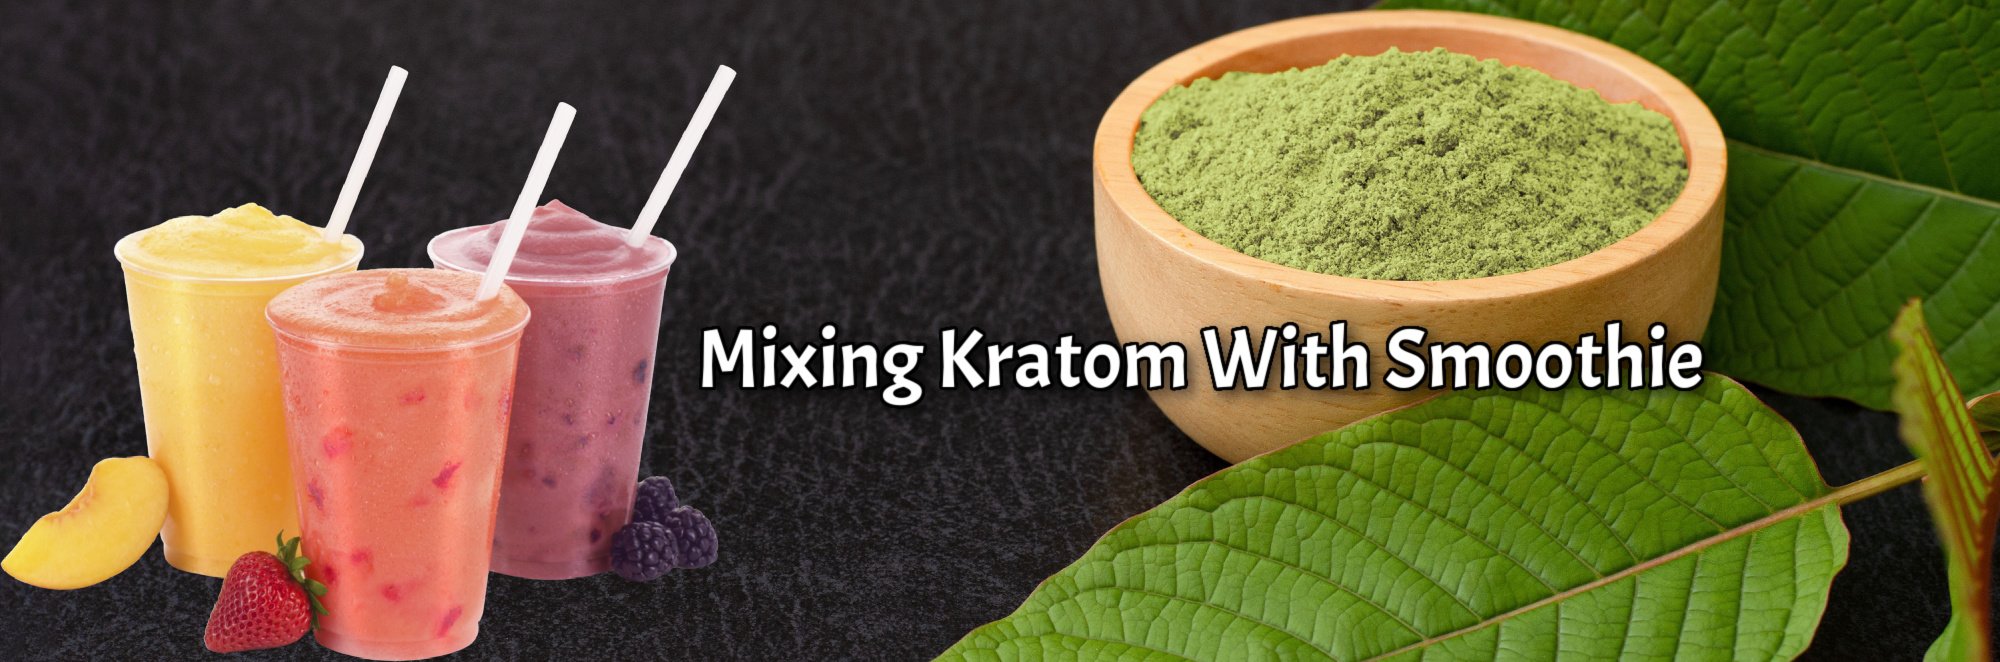 image of mixing kratom with smoothie